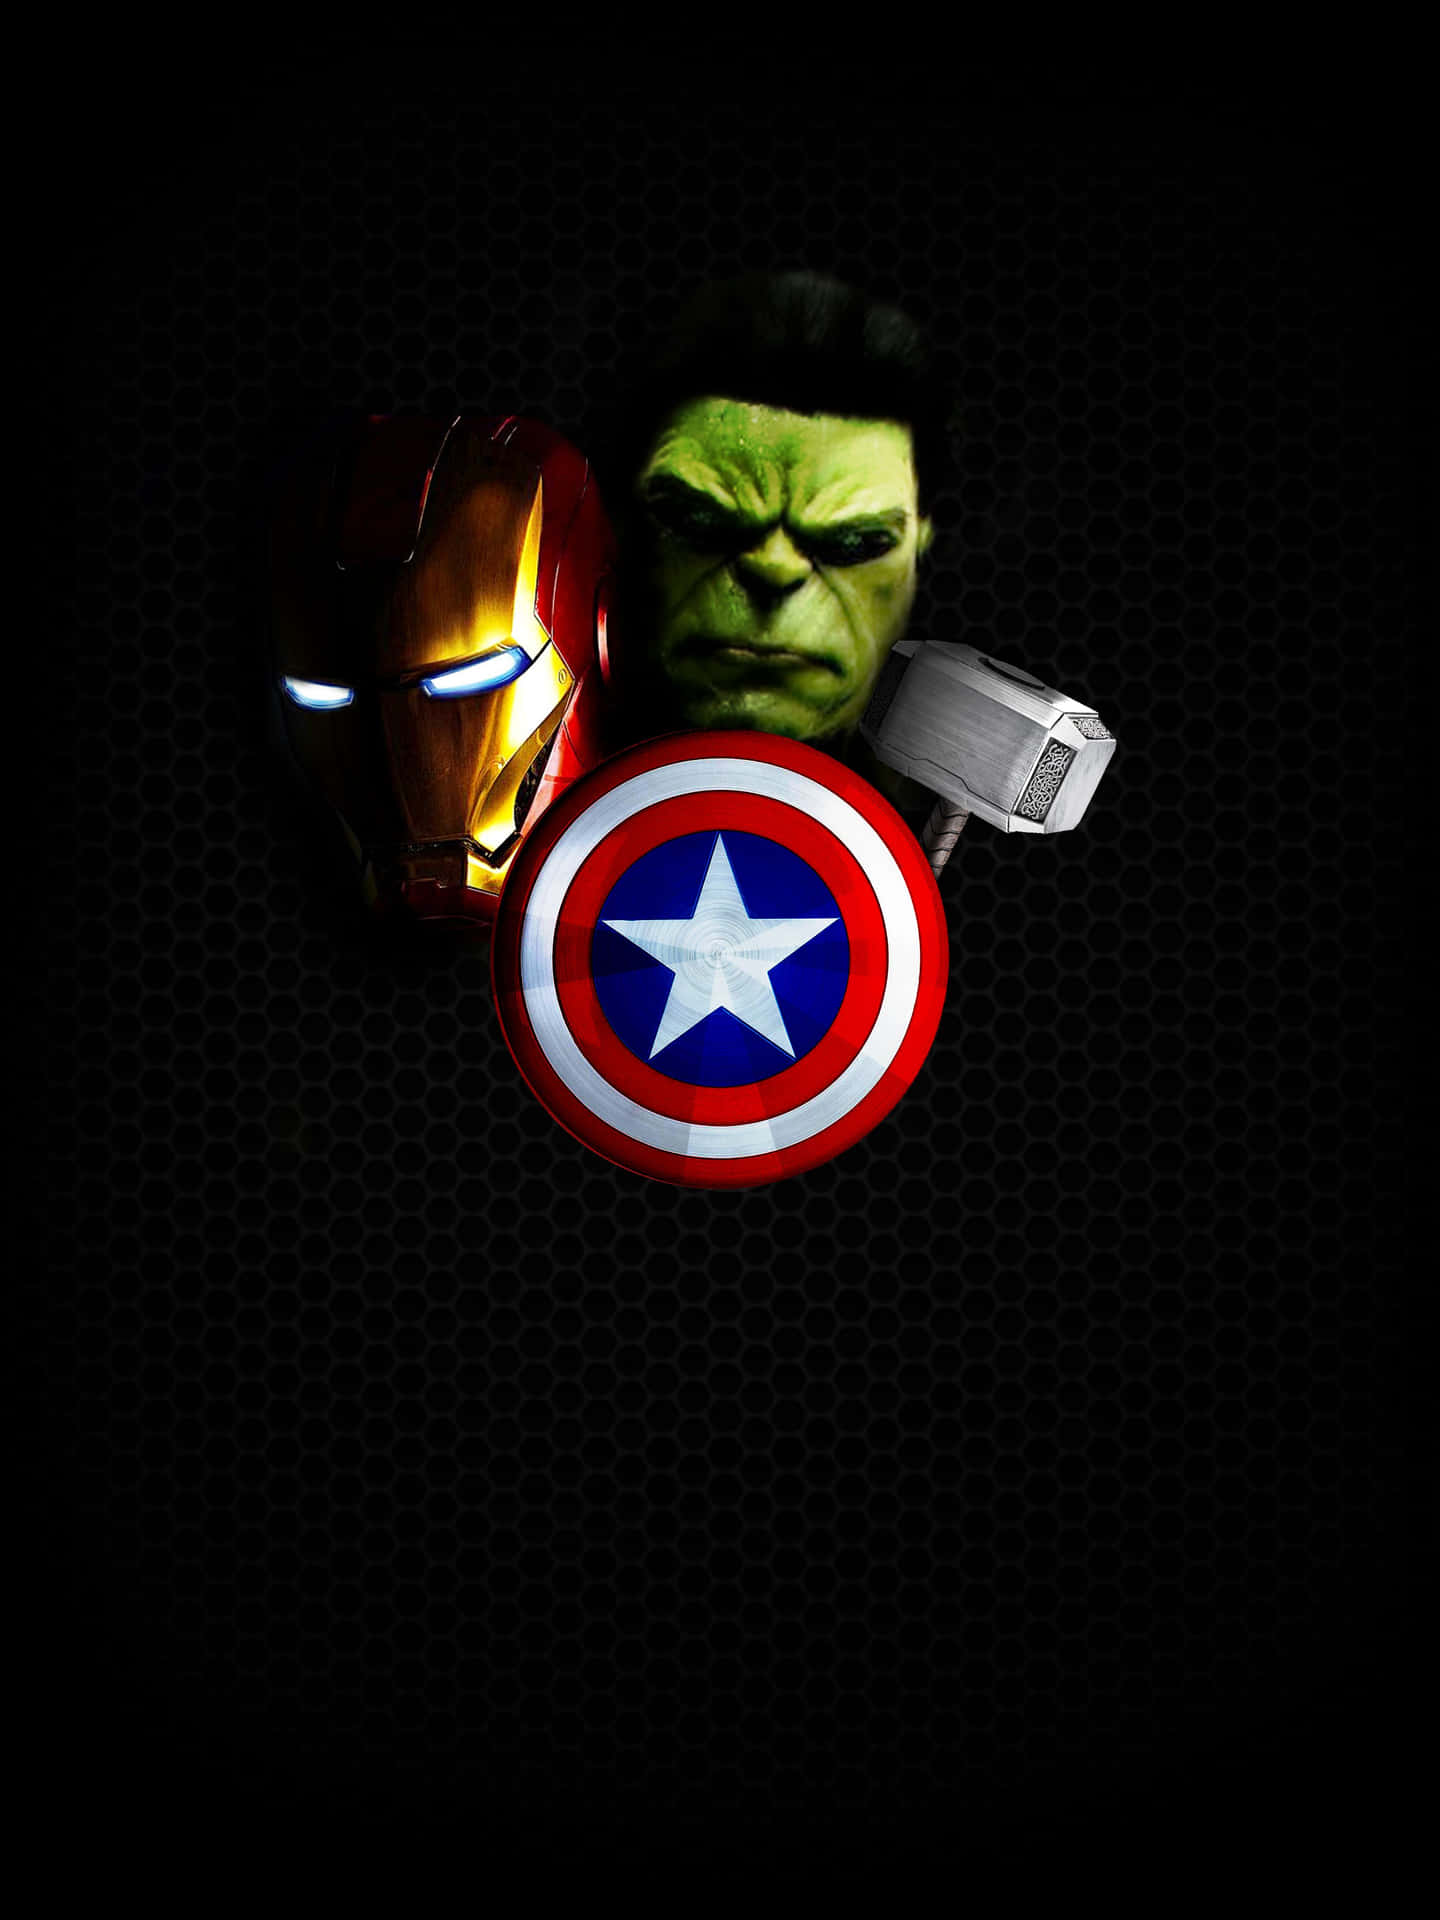 Avengers Shield And Hulk On A Black Background Wallpaper